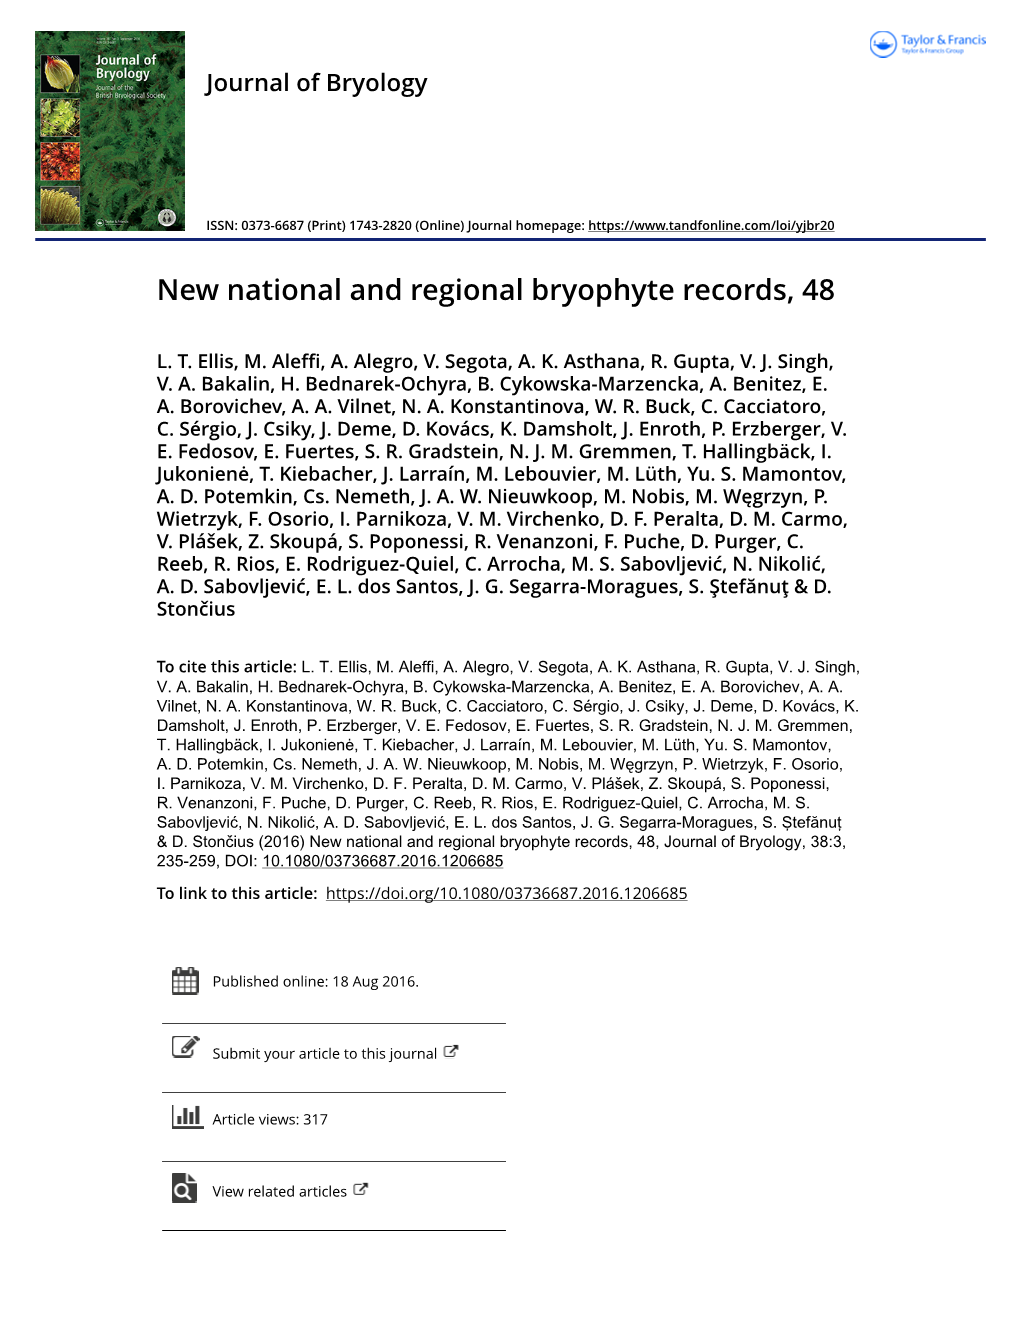 New National and Regional Bryophyte Records, 48